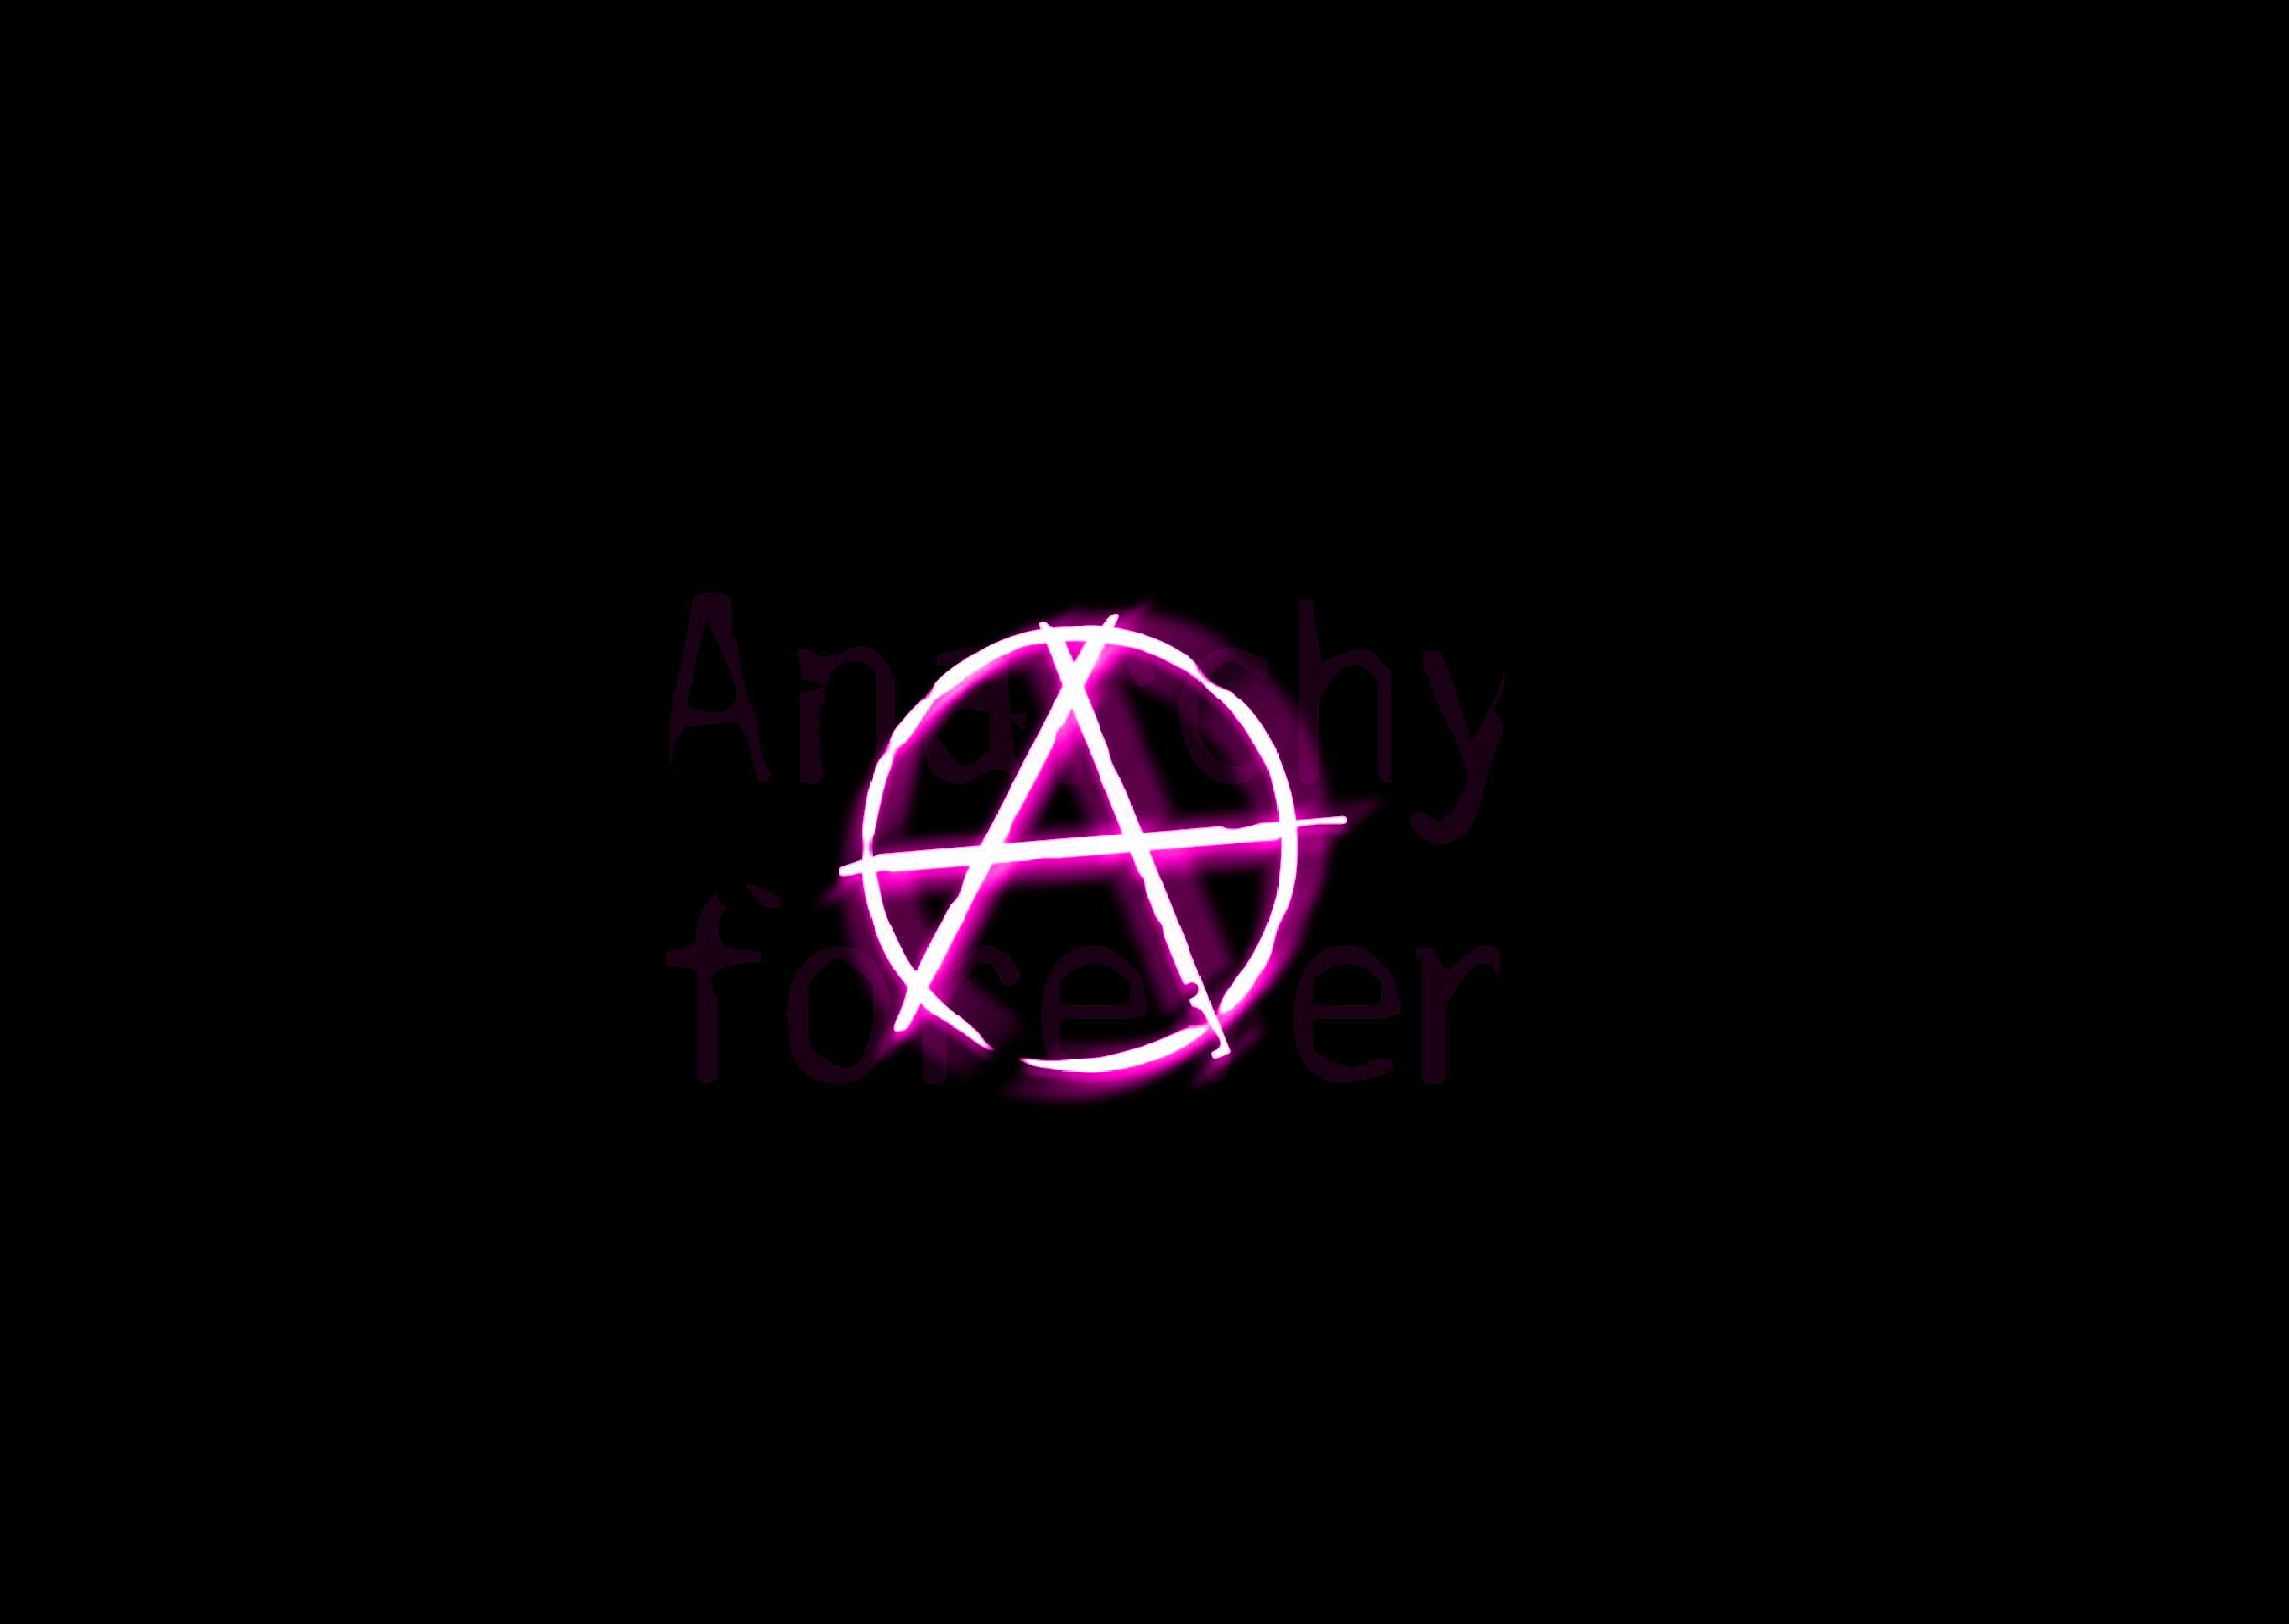 Anarchy Symbol Wallpaper for Free Download 41 Anarchy